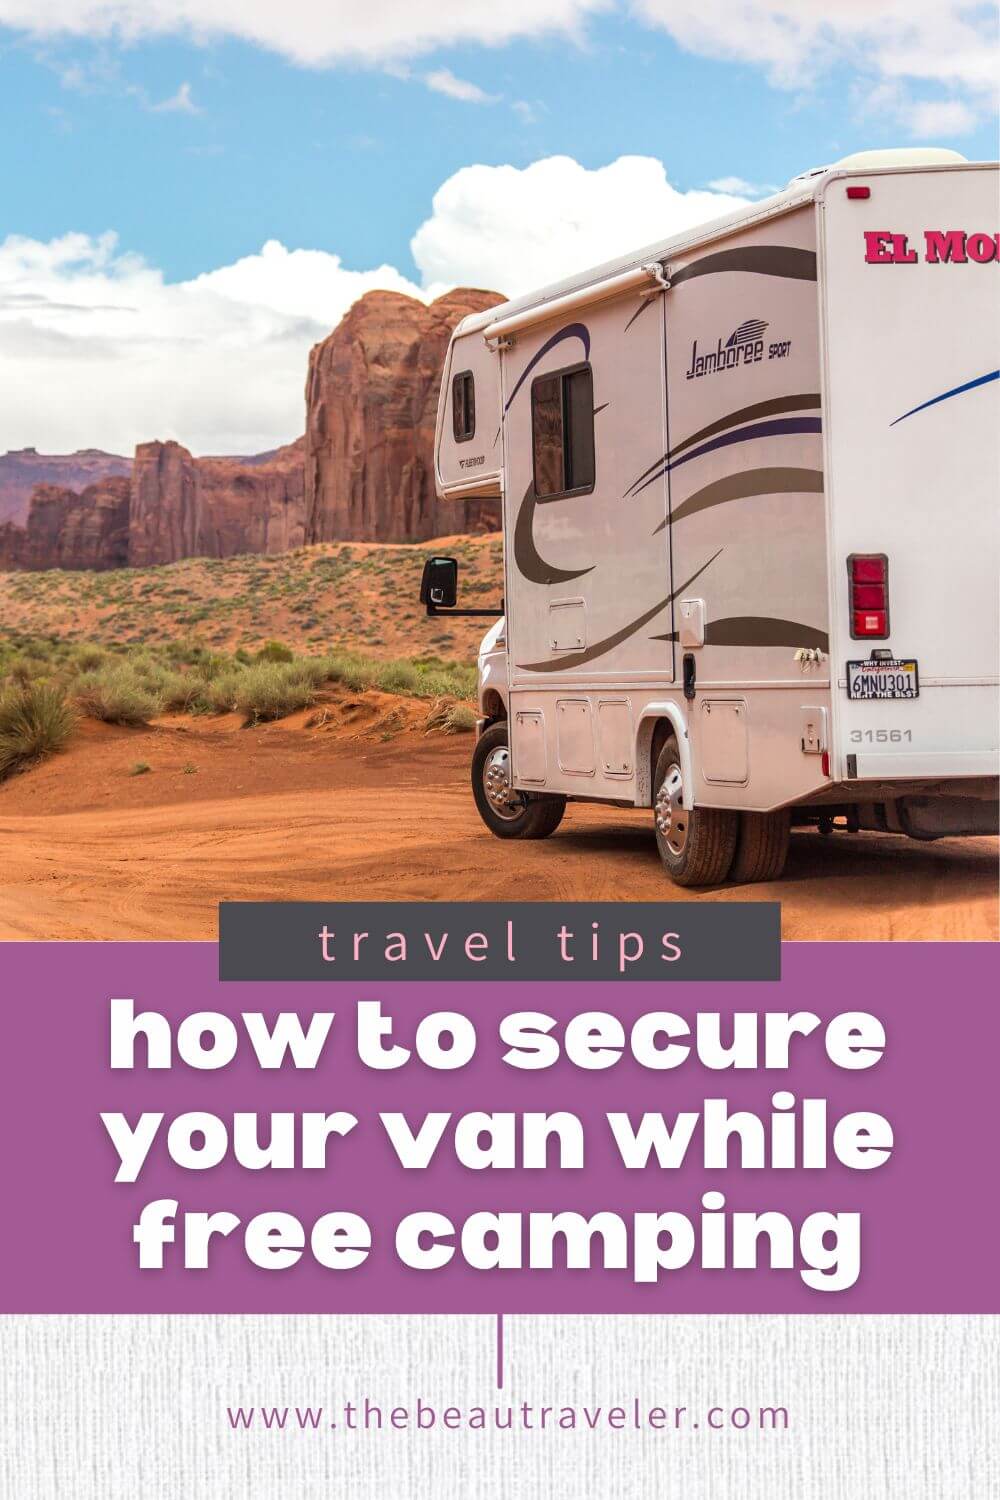 7 Tips for Securing Your Van While Free Camping - The BeauTraveler